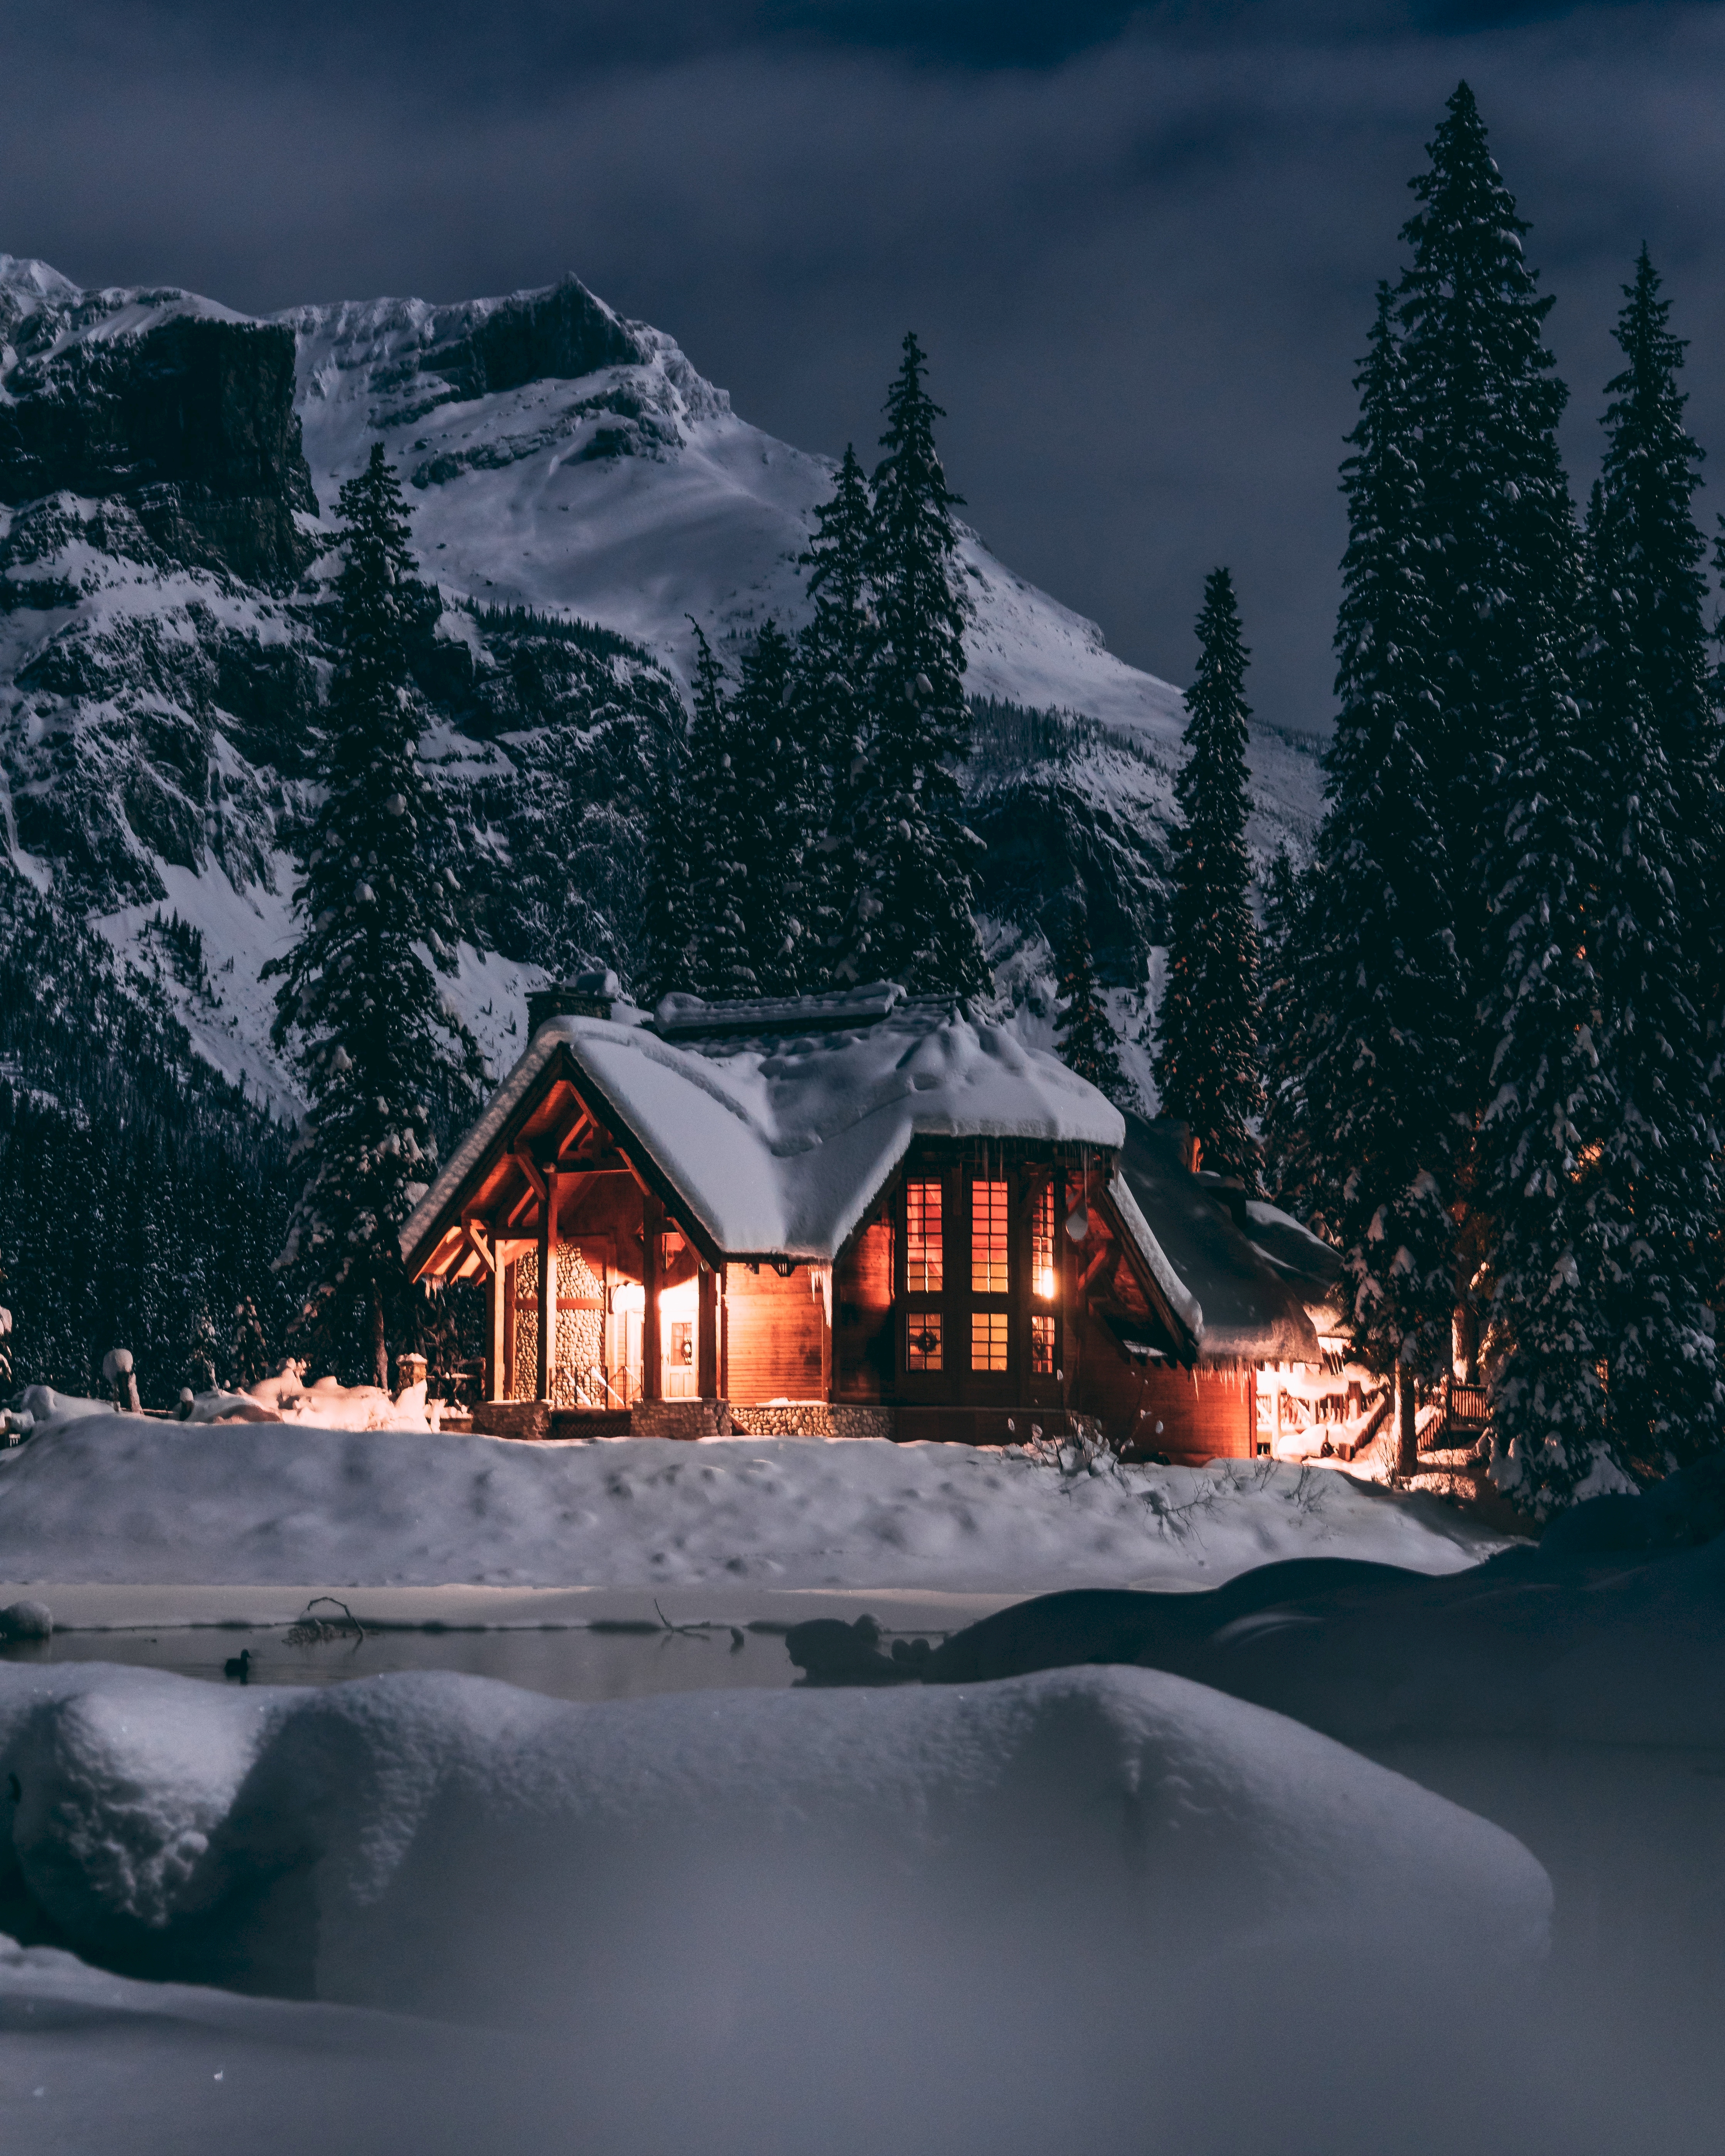 snow, winter, nature, trees, small house, lodge, evening